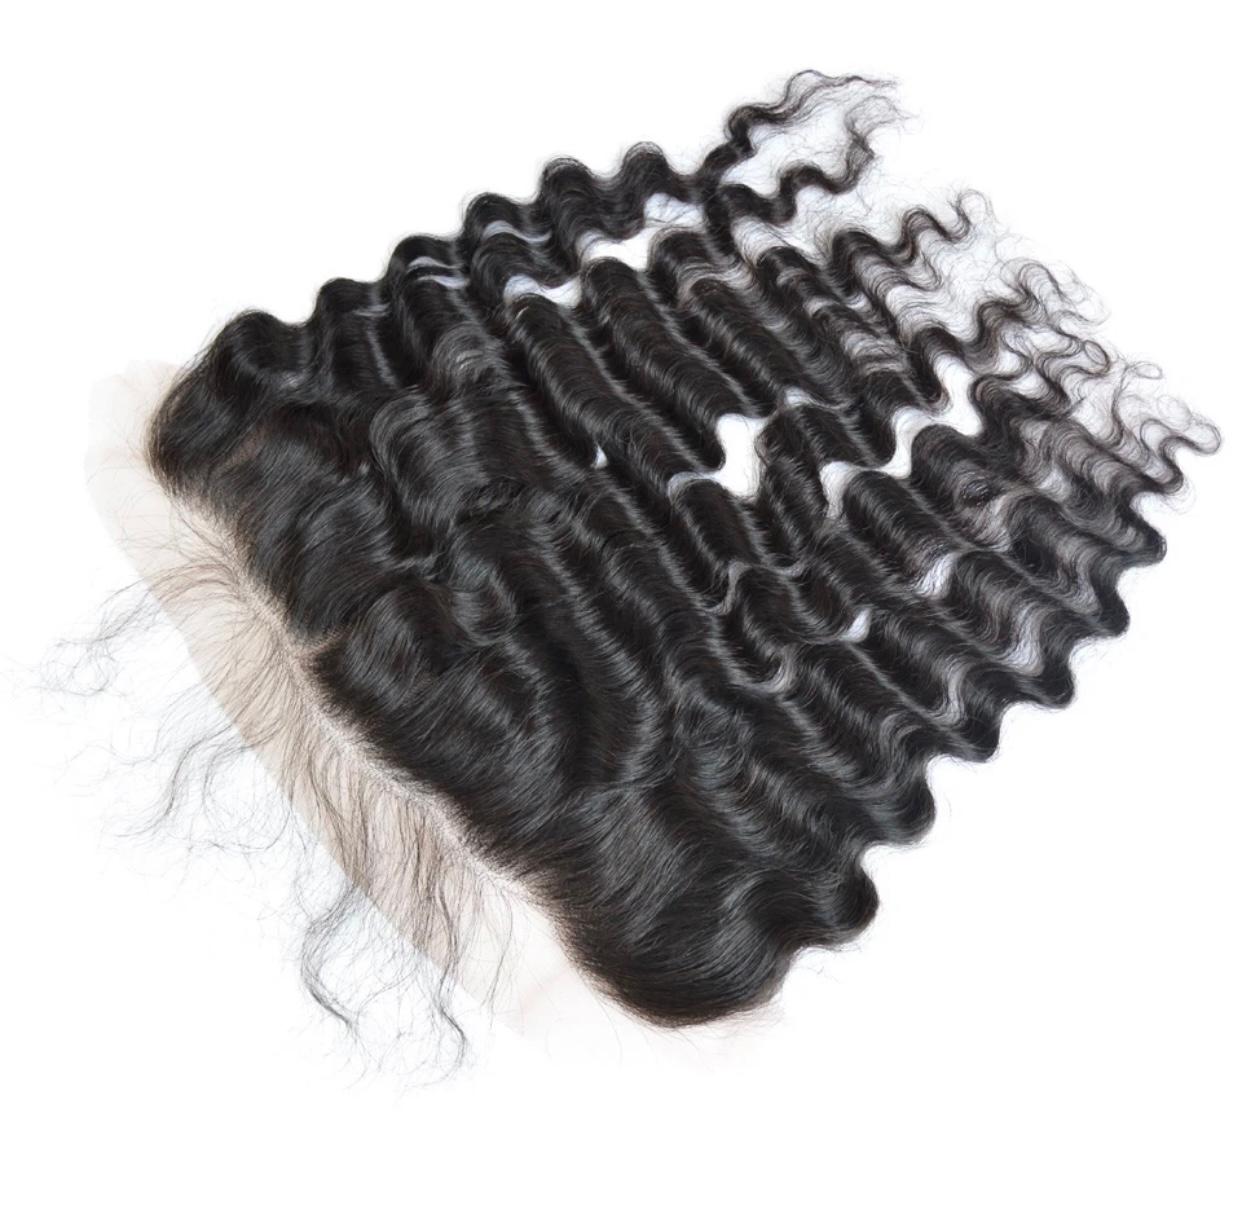 613 LACE FRONTAL